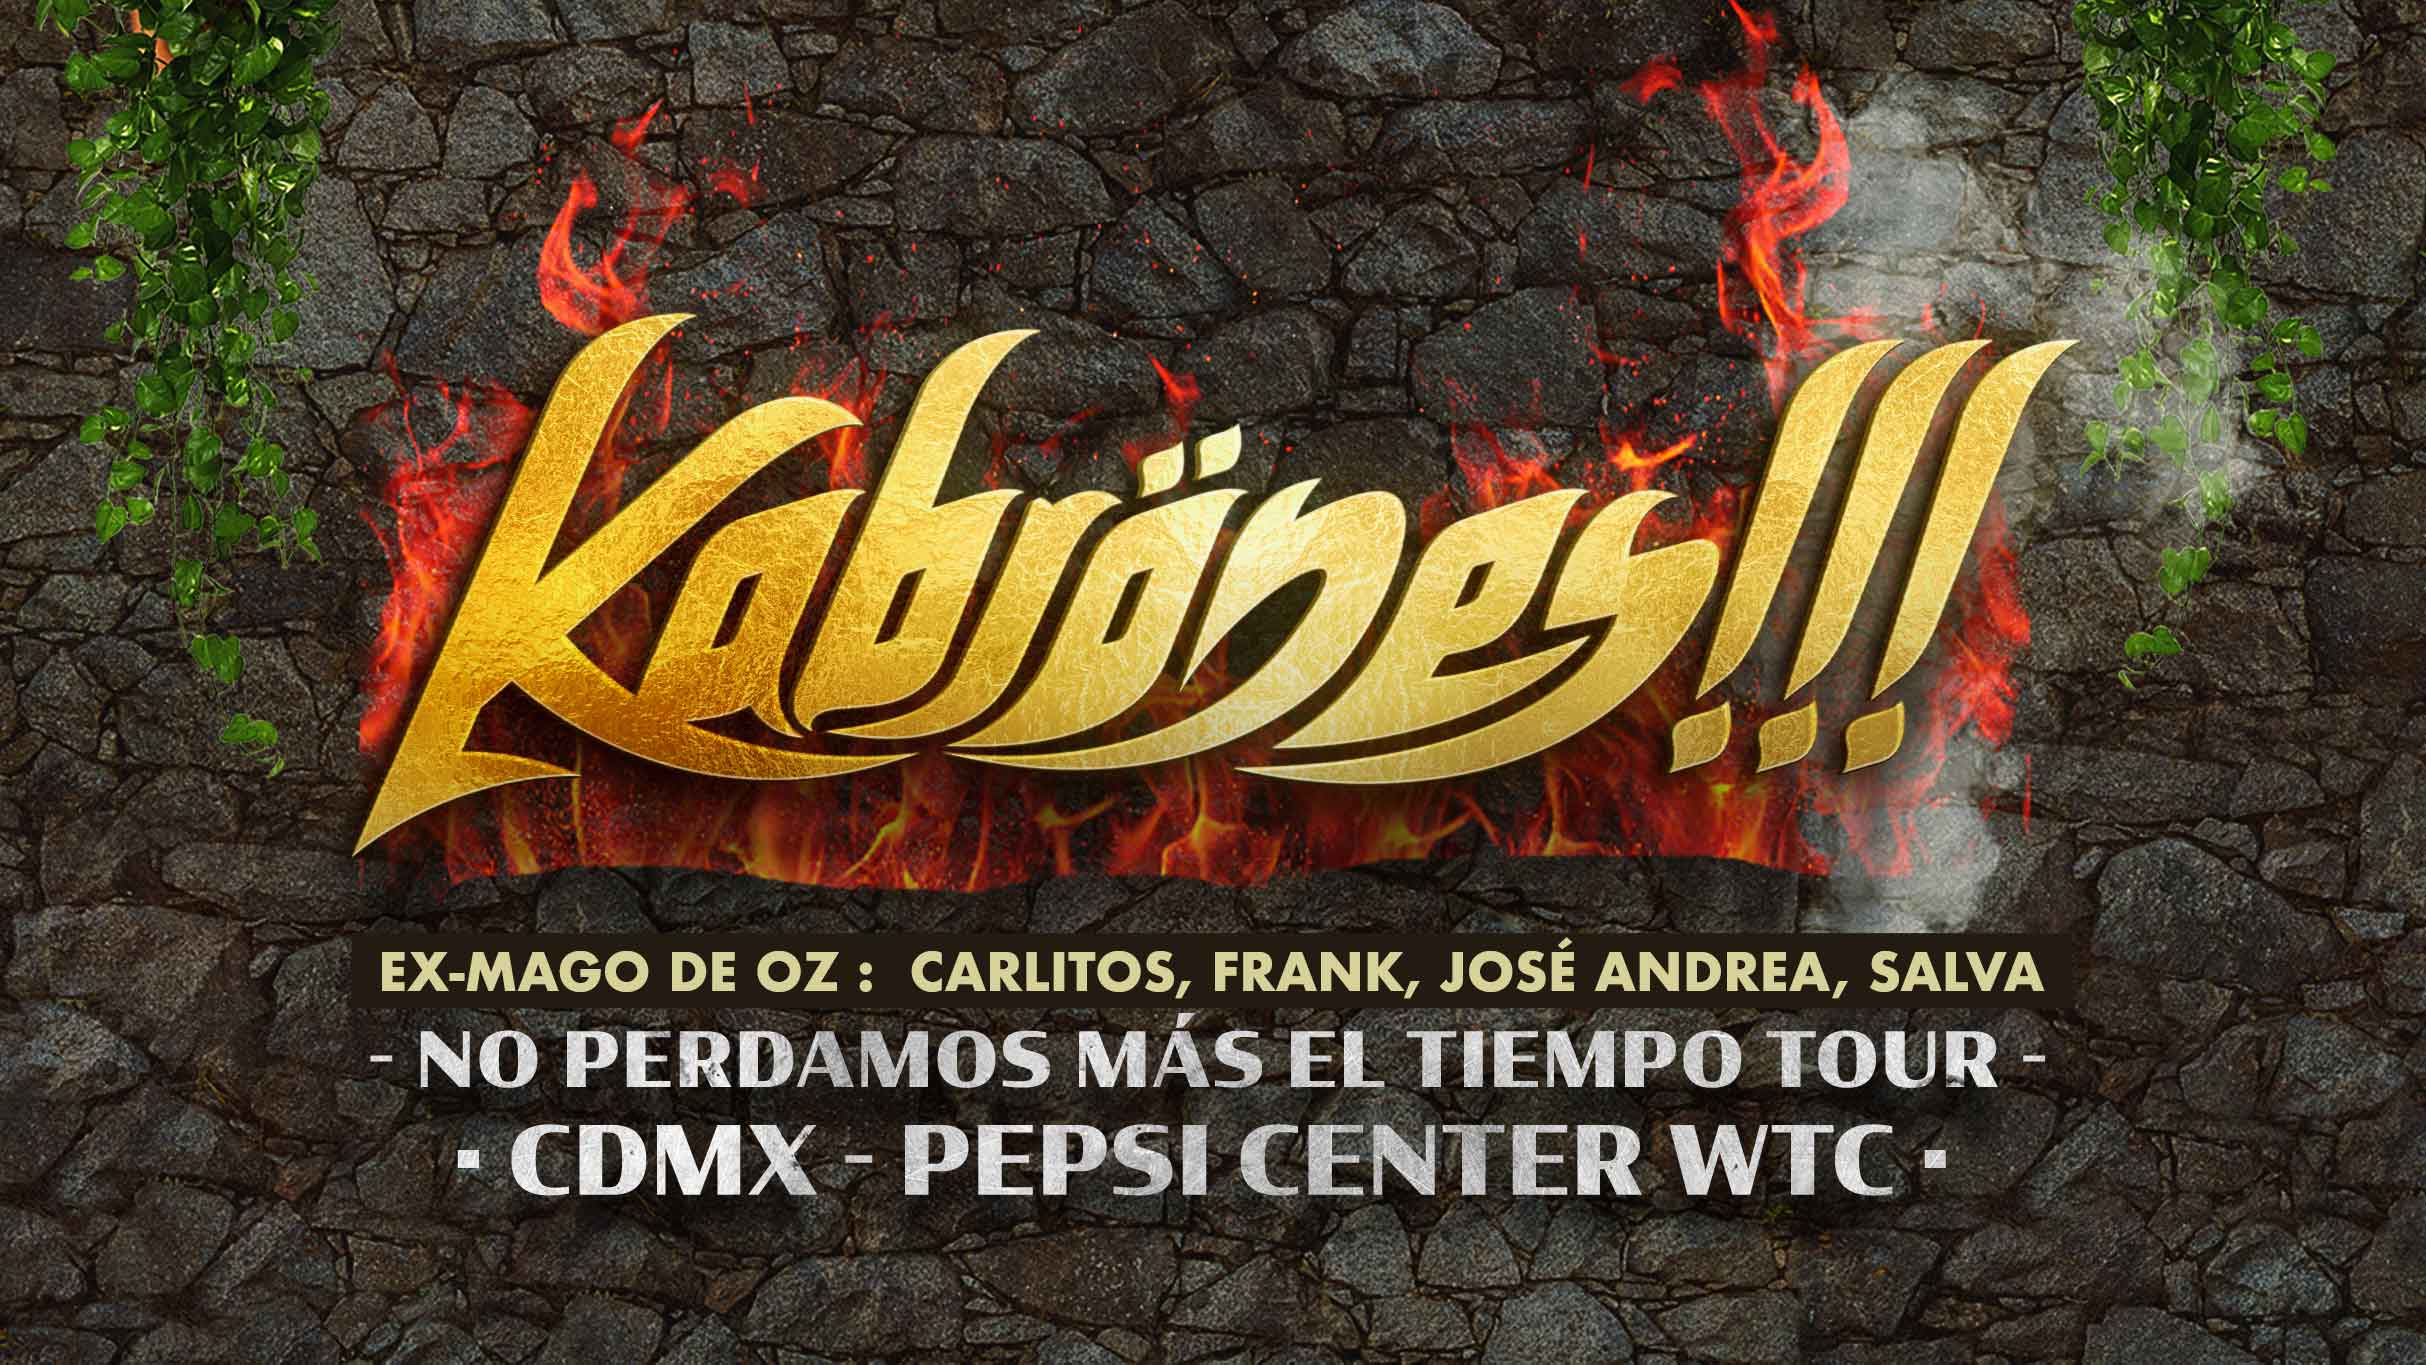 Kabrones!